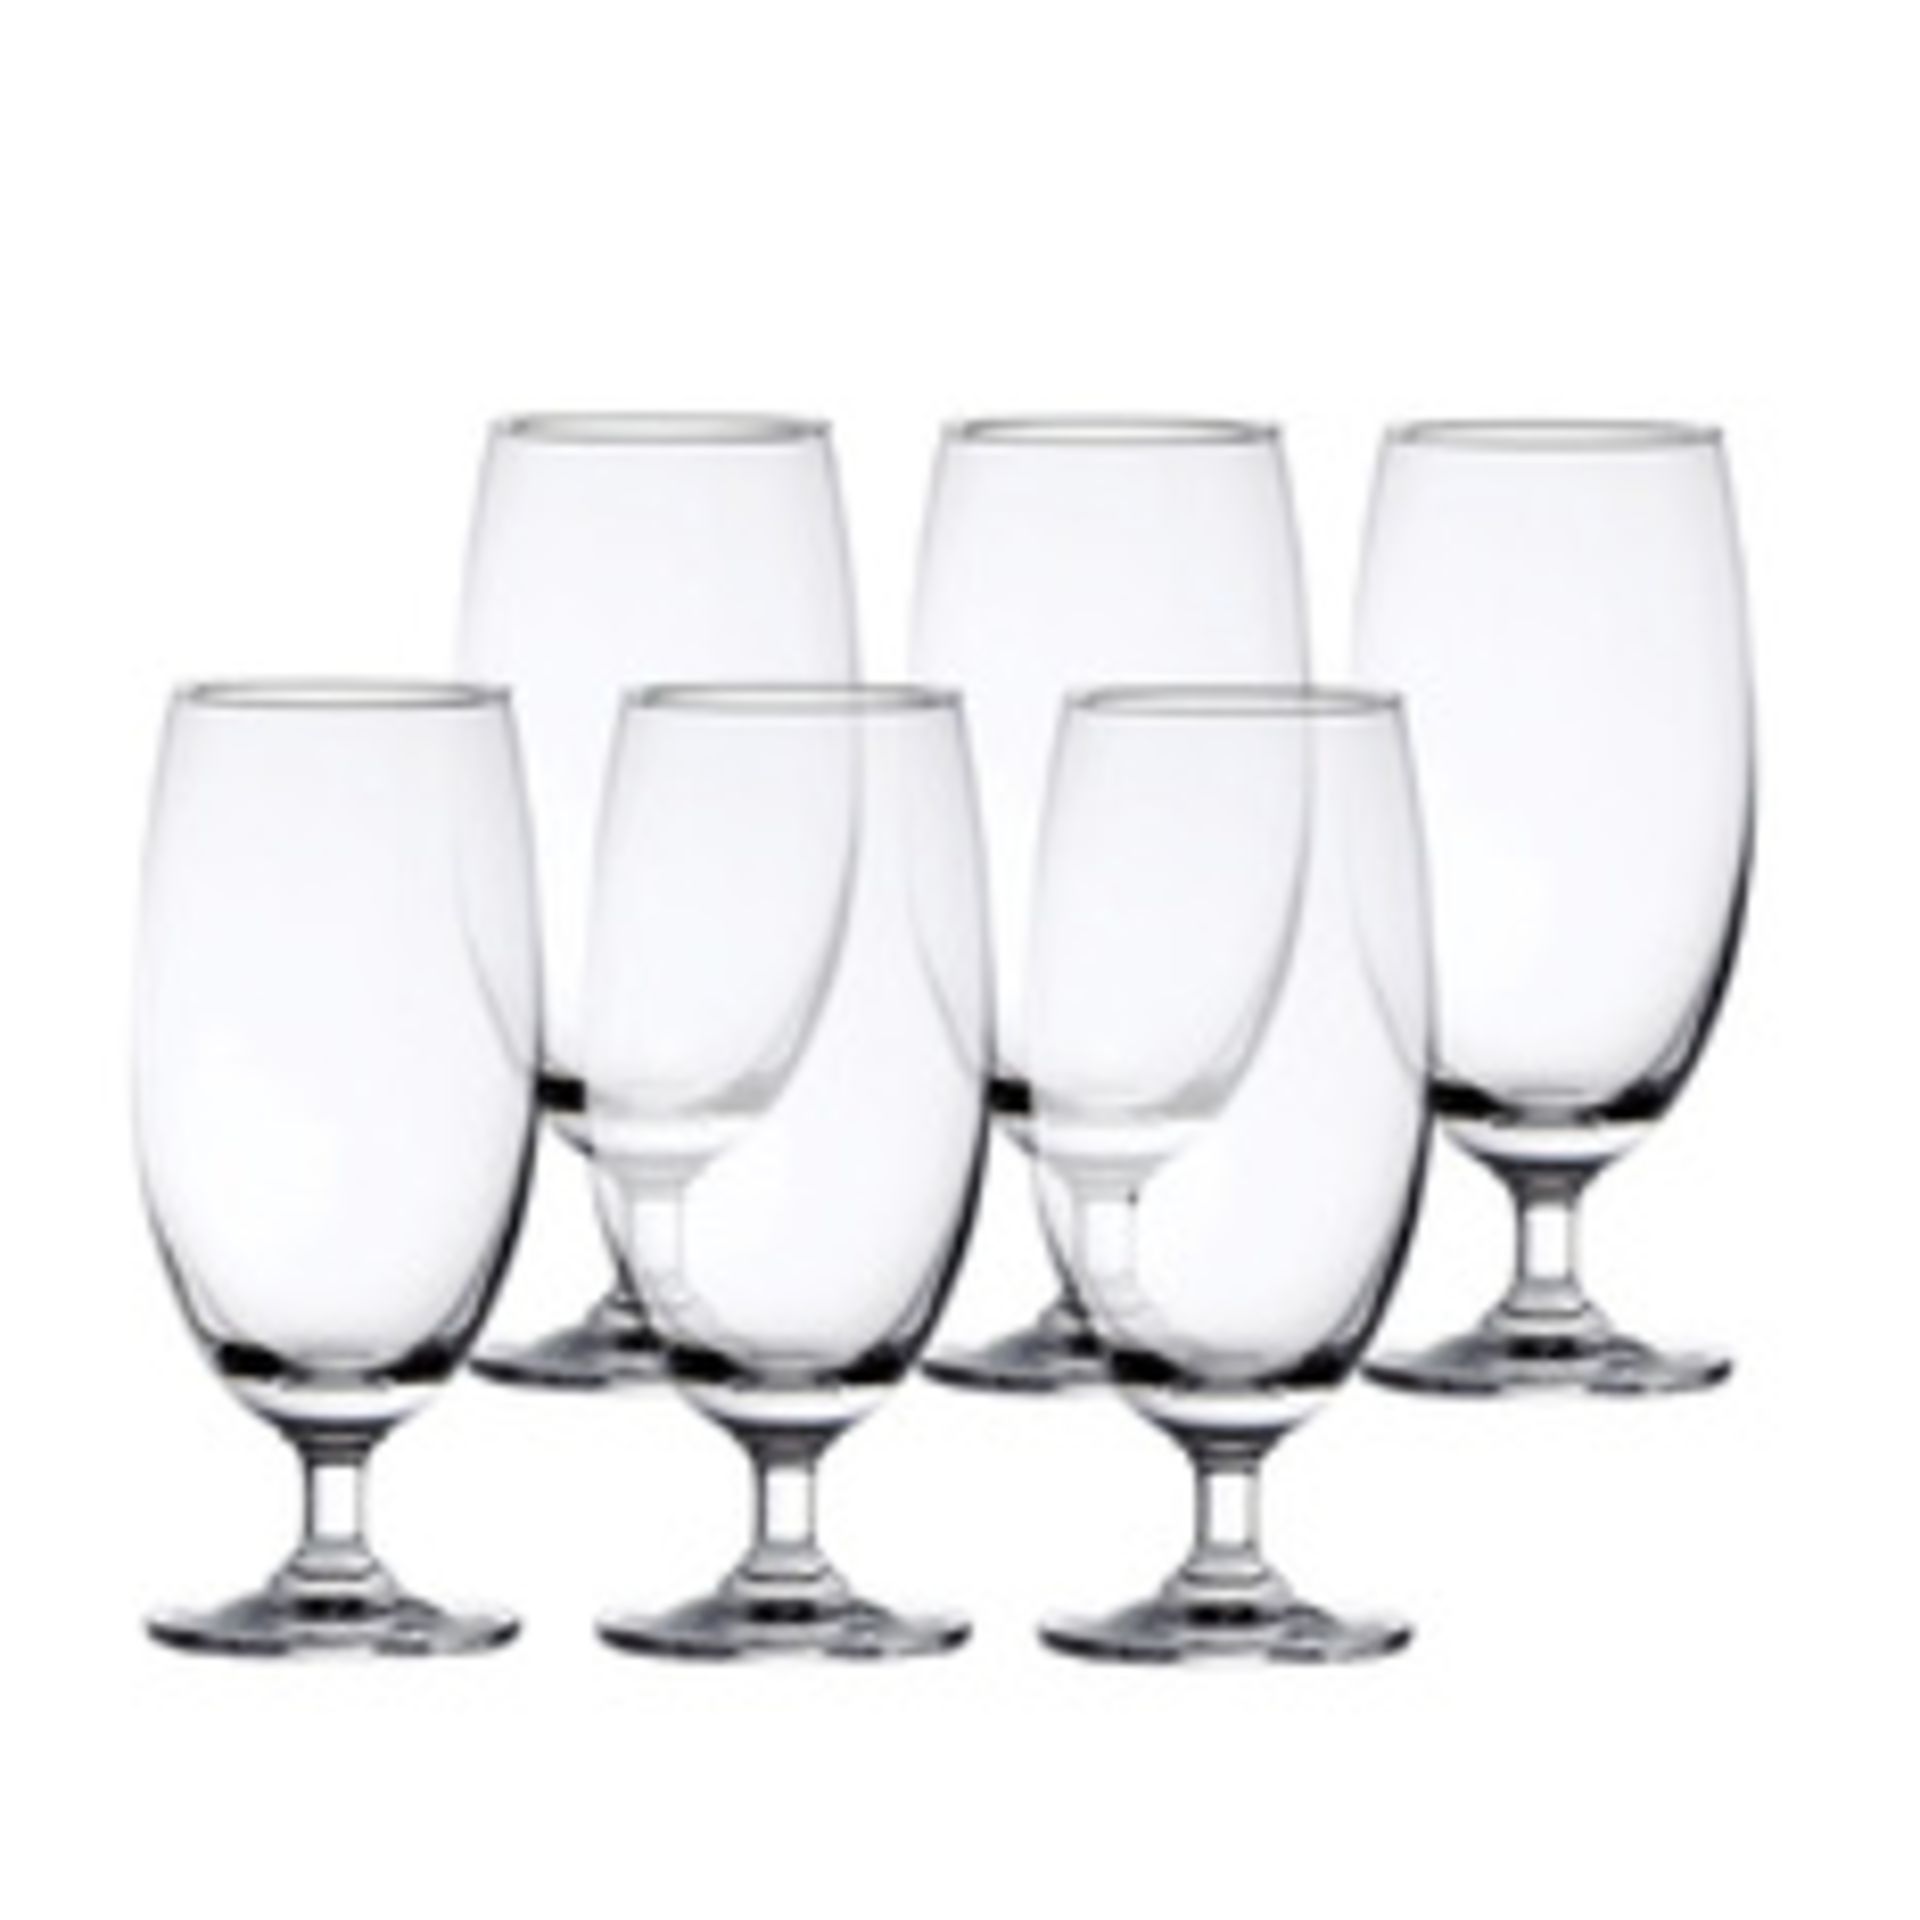 V Brand New 6 Piece Bistro Beer Glass 400 ml X 4 Bid price to be multiplied by Four